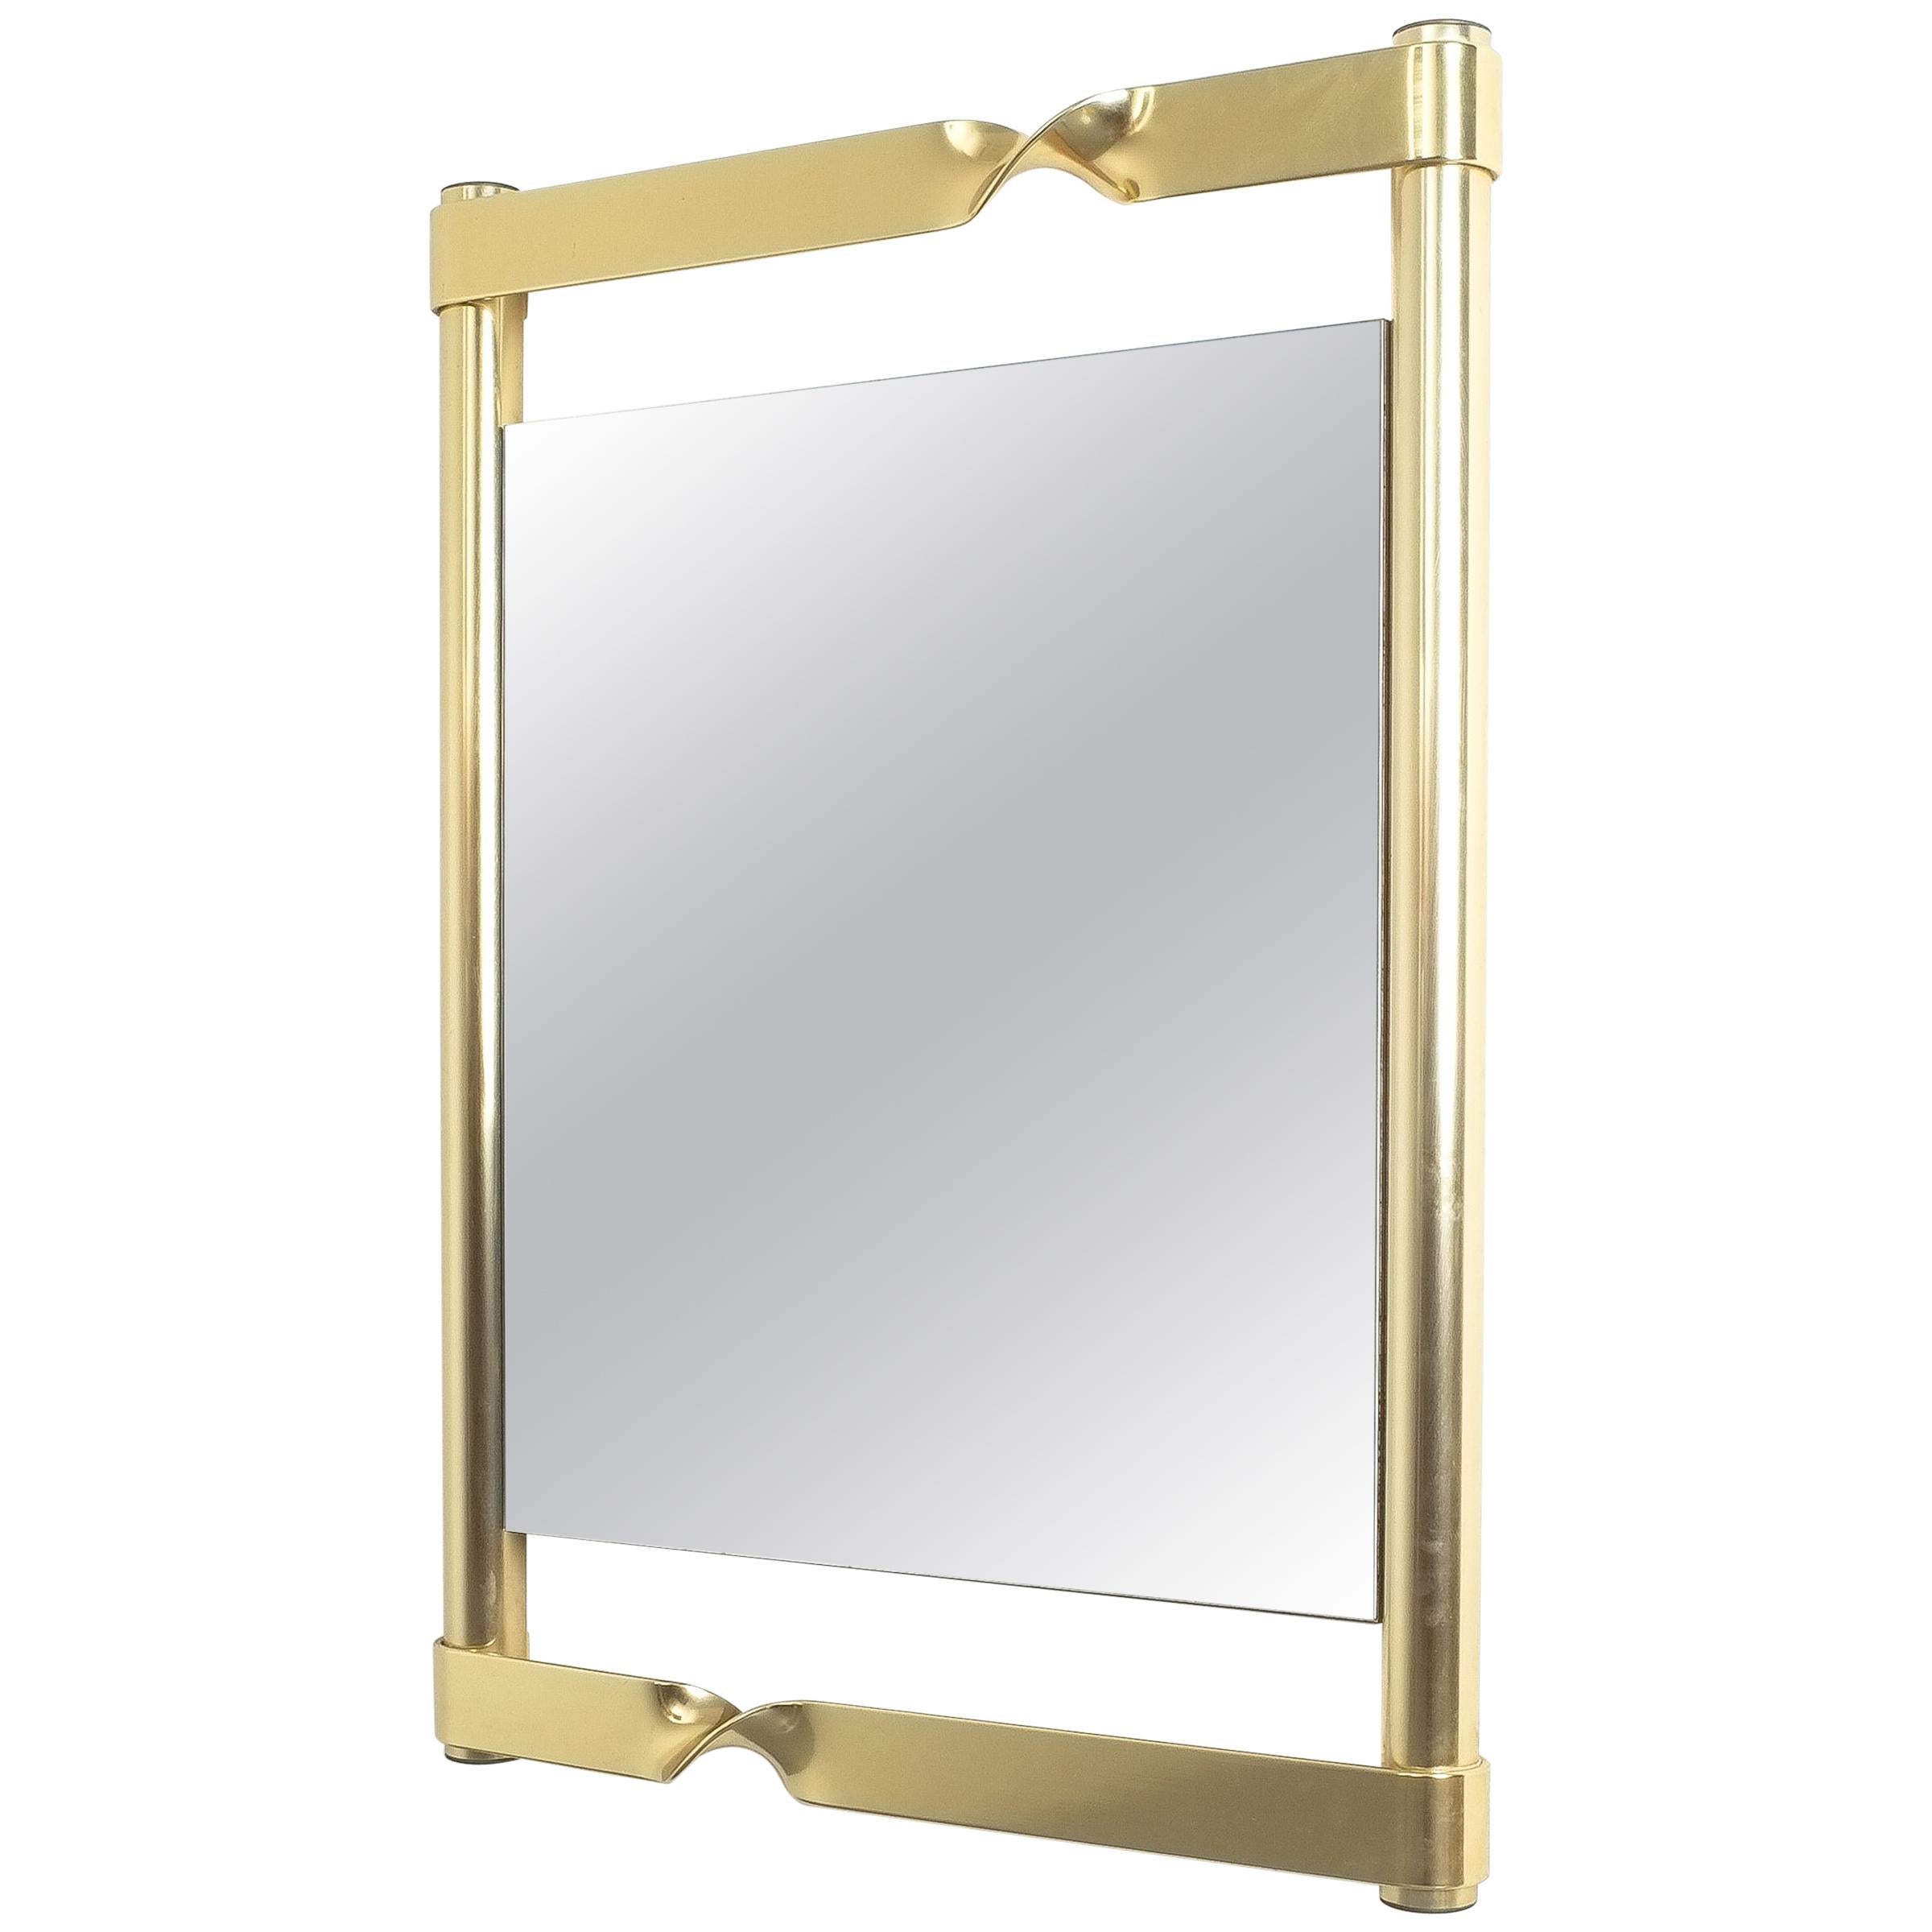 Luciano Frigerio Midcentury Brass Mirror with Twisted Frame, Italy, circa 1970